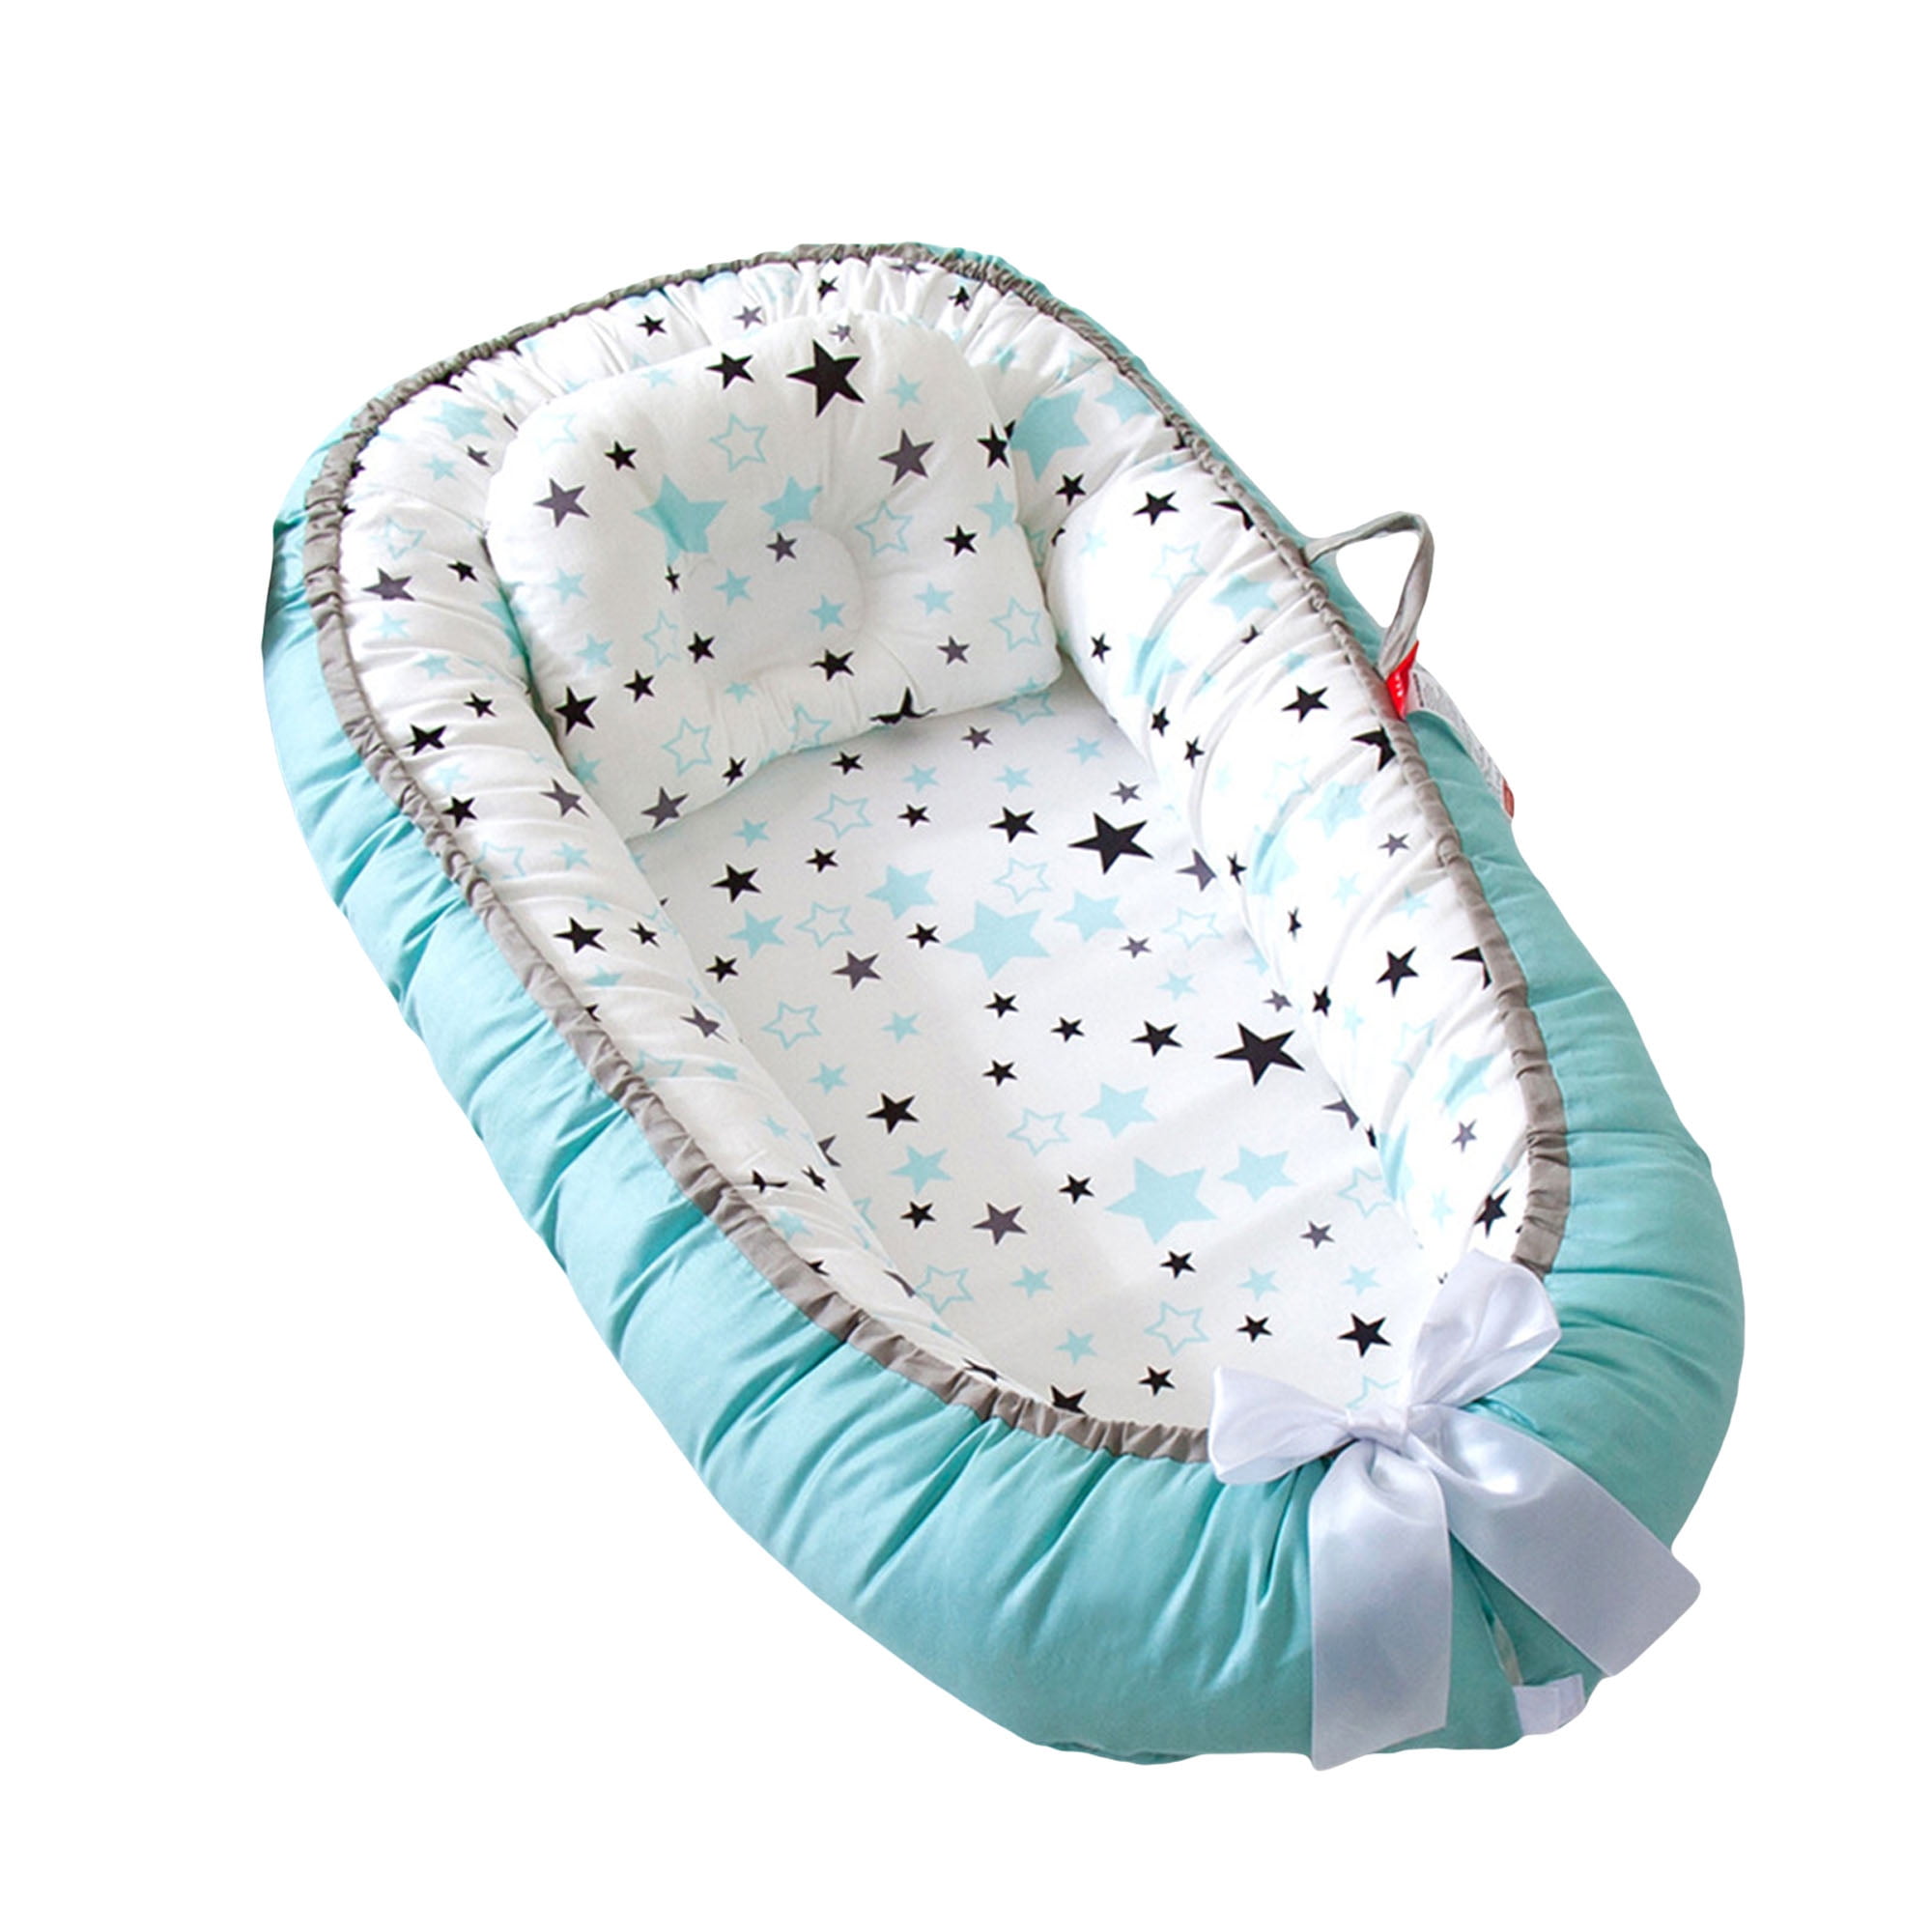 Baby Lounger,Baby Nest Portable Super Soft Organic Cotton and Breathable Detachable Newborn Lounger Perfect for Co-Sleeping/Napping/Travel,Whale Nice Baby Shower Gift 